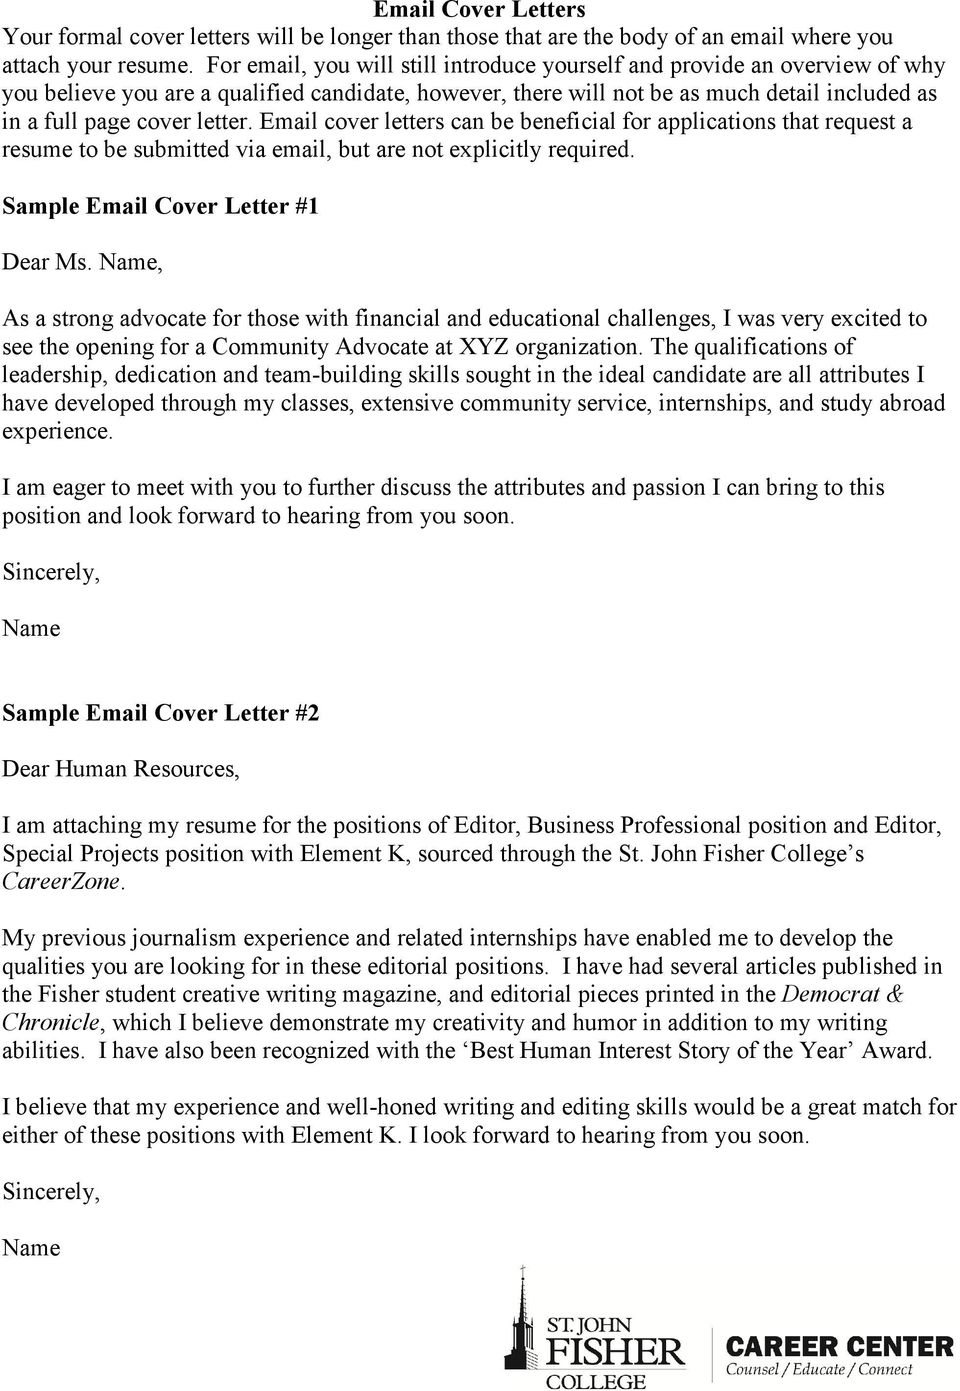 letter. Email cover letters can be beneficial for applications that request a resume to be submitted via email, but are not explicitly required. Sample Email Cover Letter #1 Dear Ms.